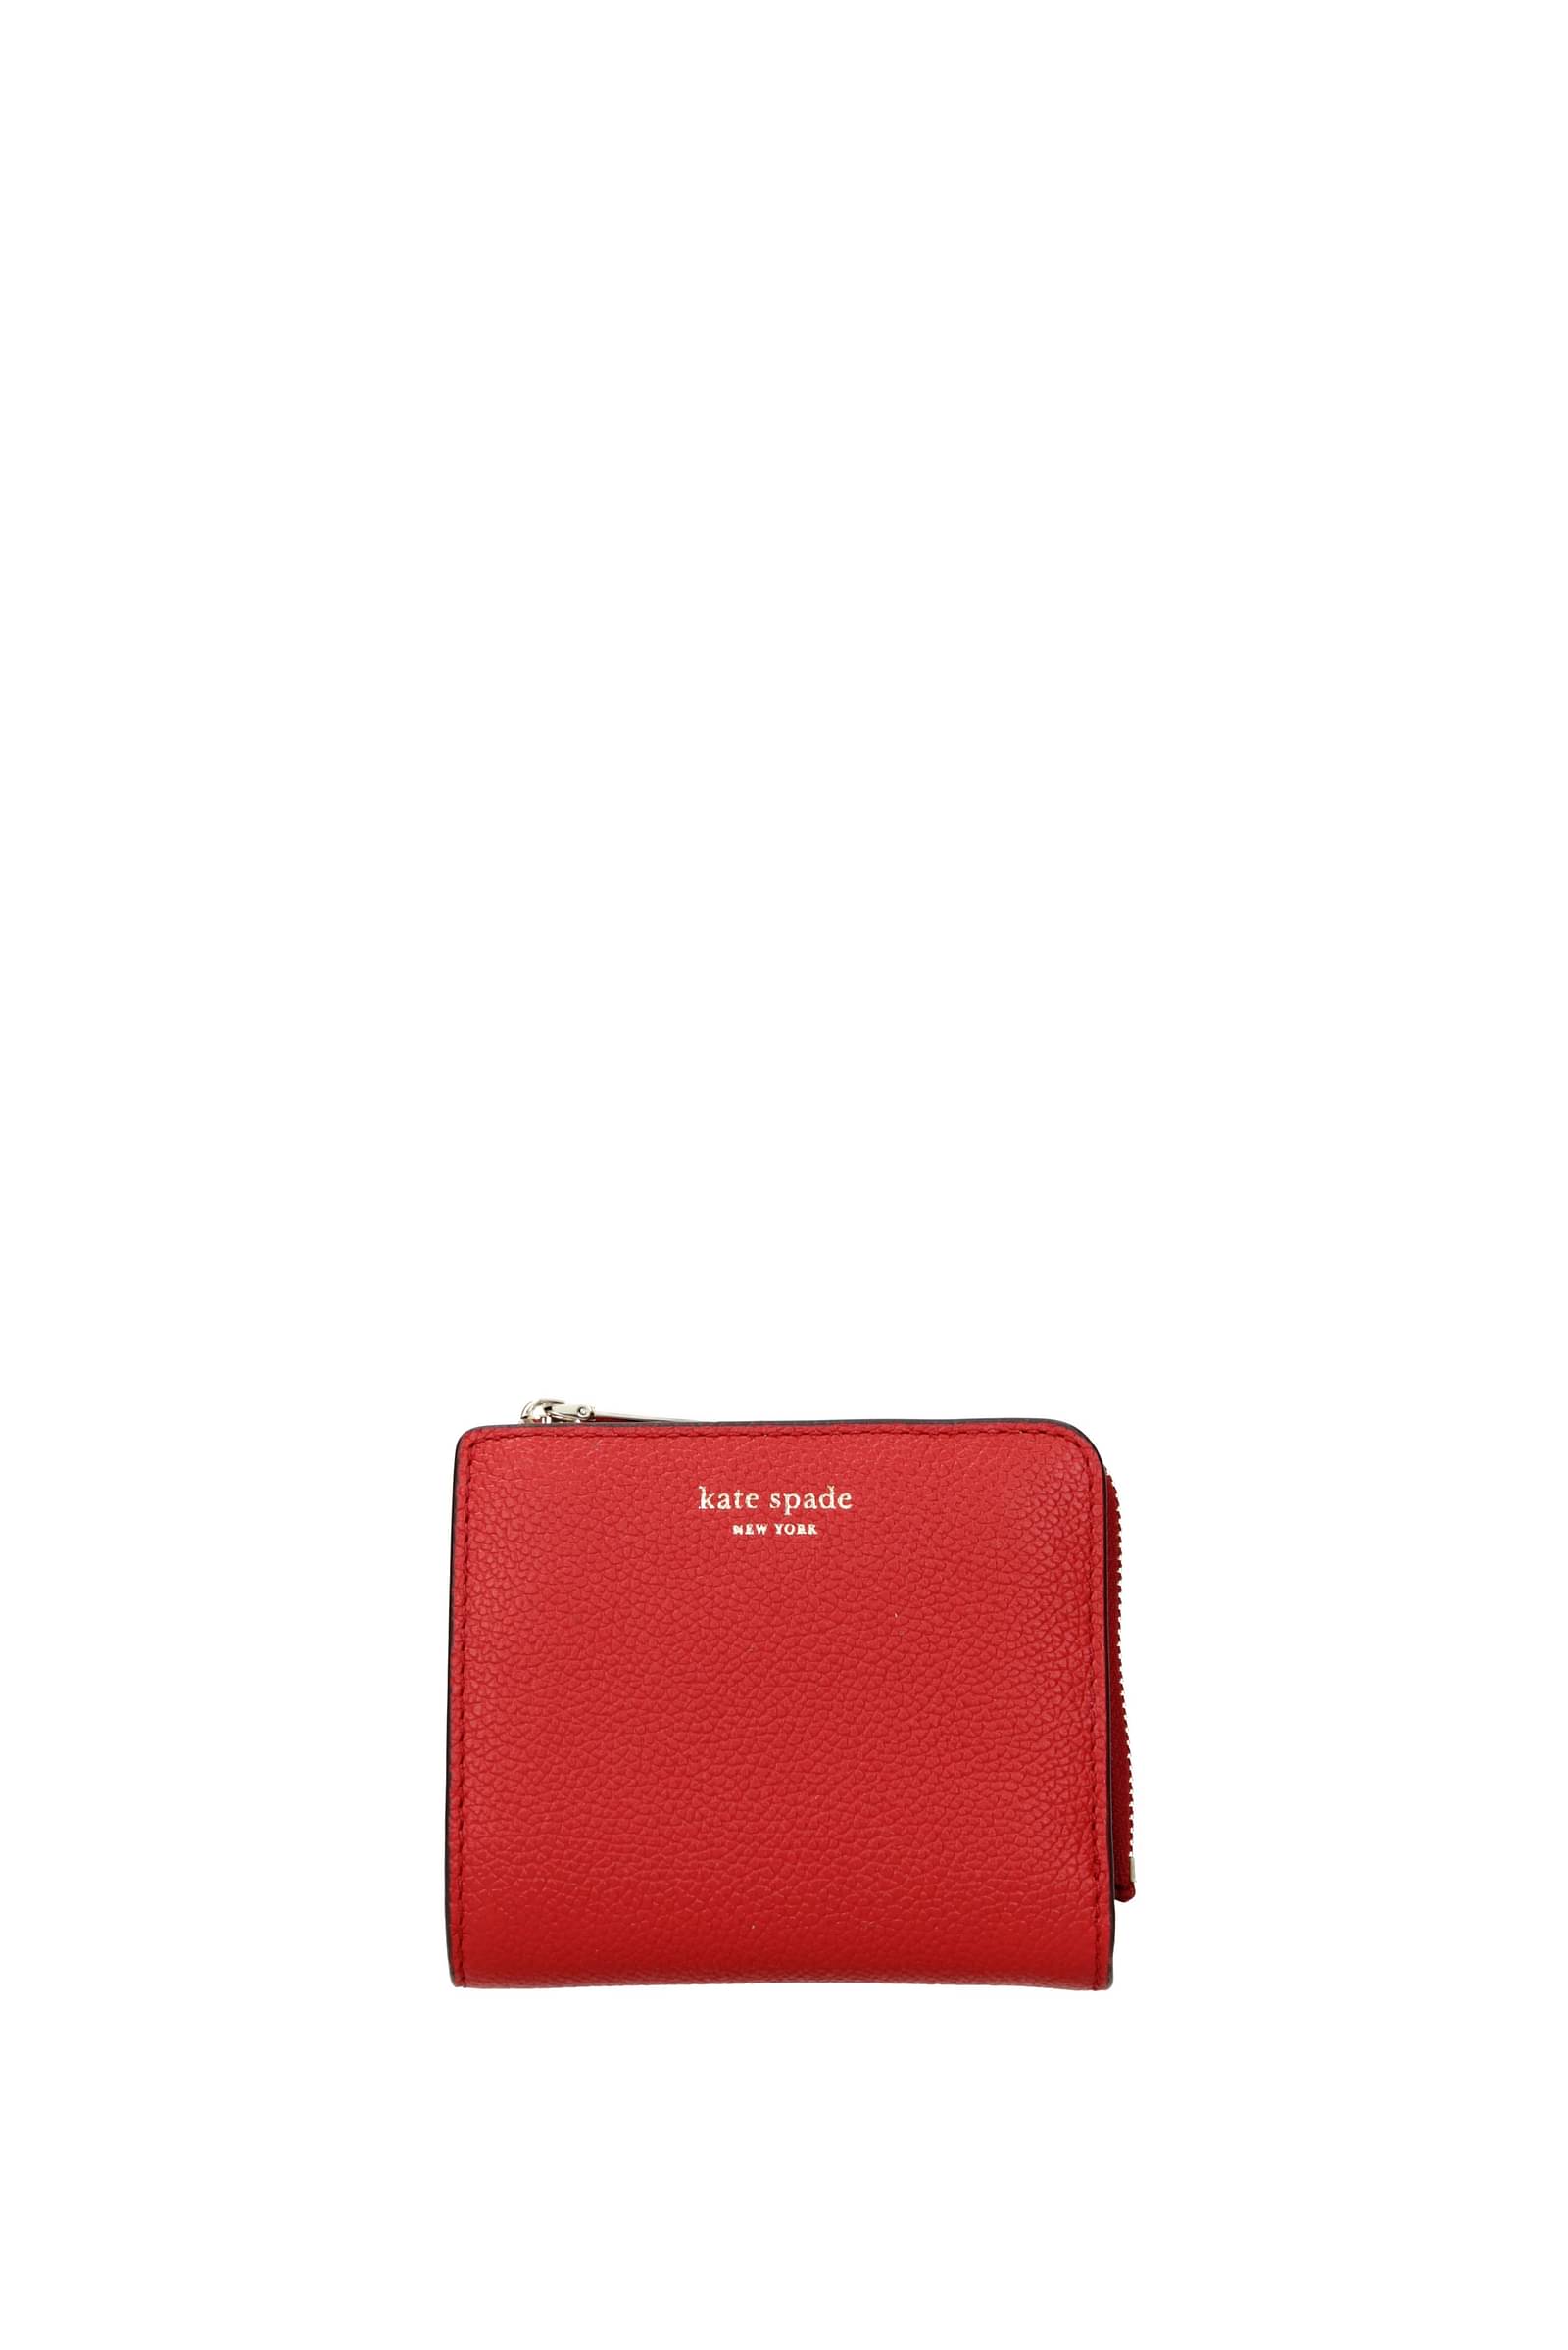 Kate Spade Wallets Women Leather Red Chili Pepper